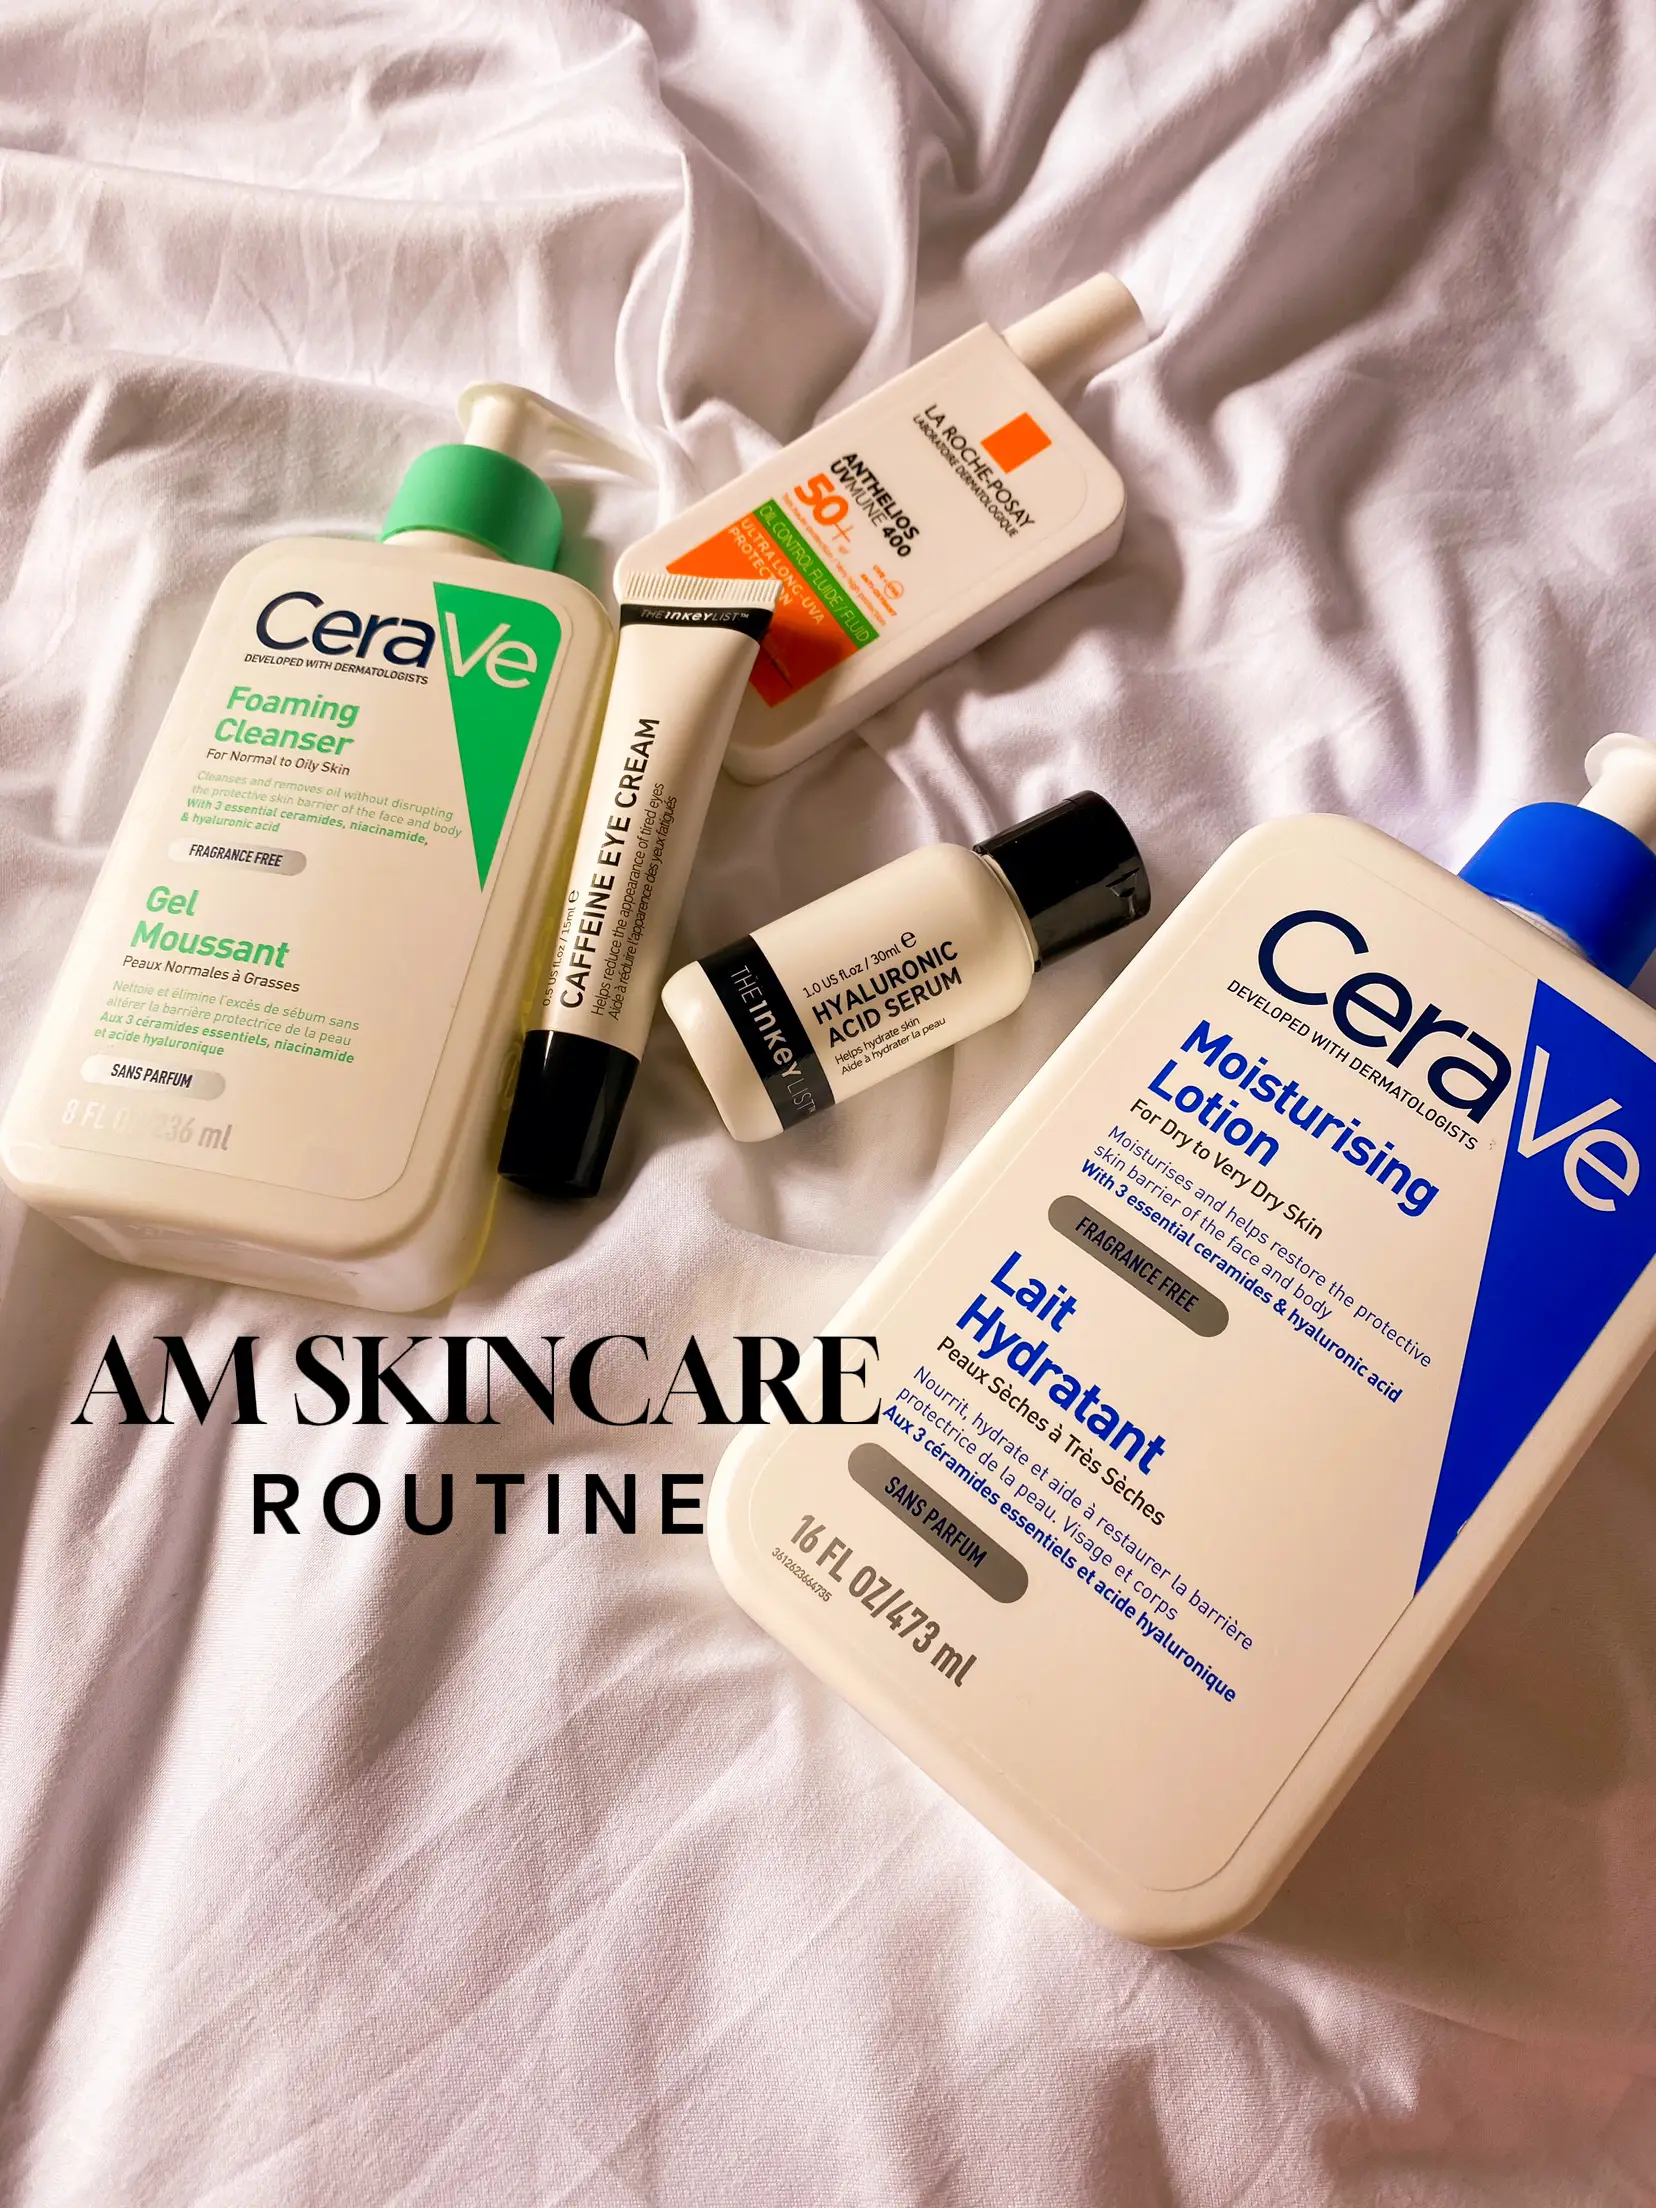 A body care routine for healthy skin – mCaffeine